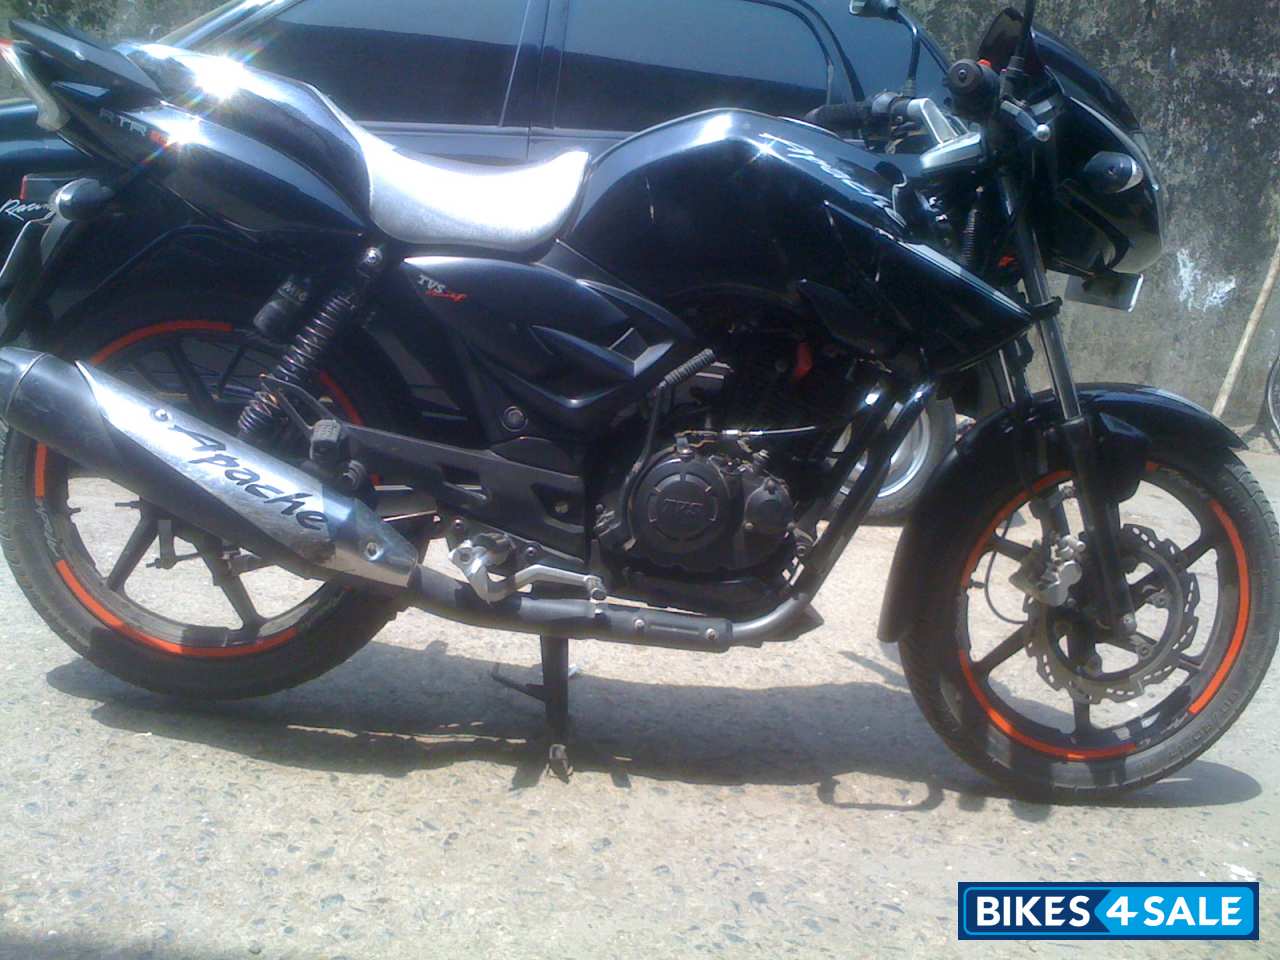 Used 08 Model Tvs Apache Rtr 160 For Sale In Mumbai Id Black Colour Bikes4sale